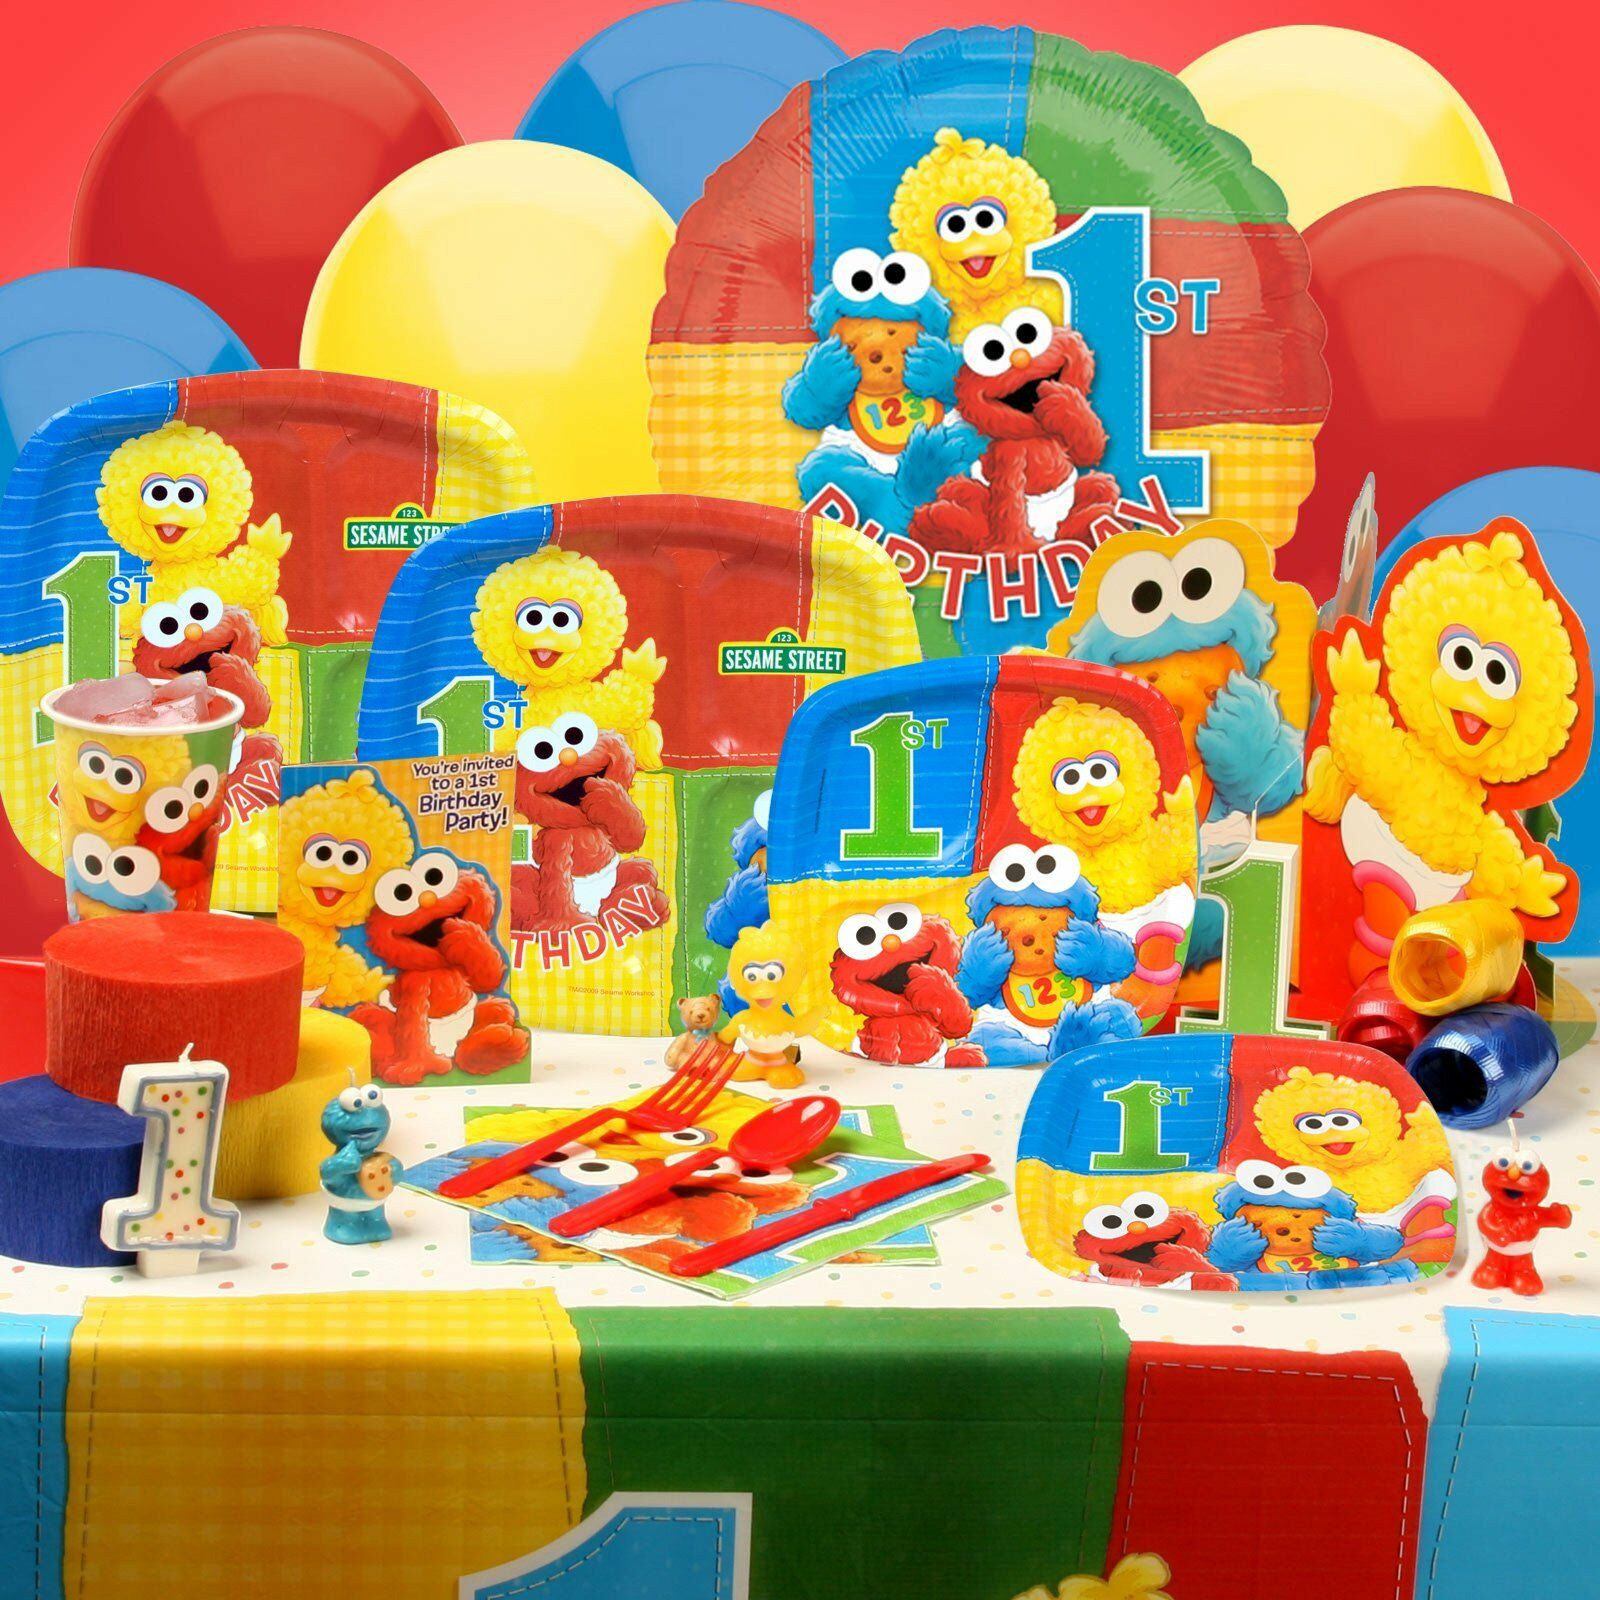 Sesame Street Birthday Party Decorations
 Party decorations deals on 1001 Blocks